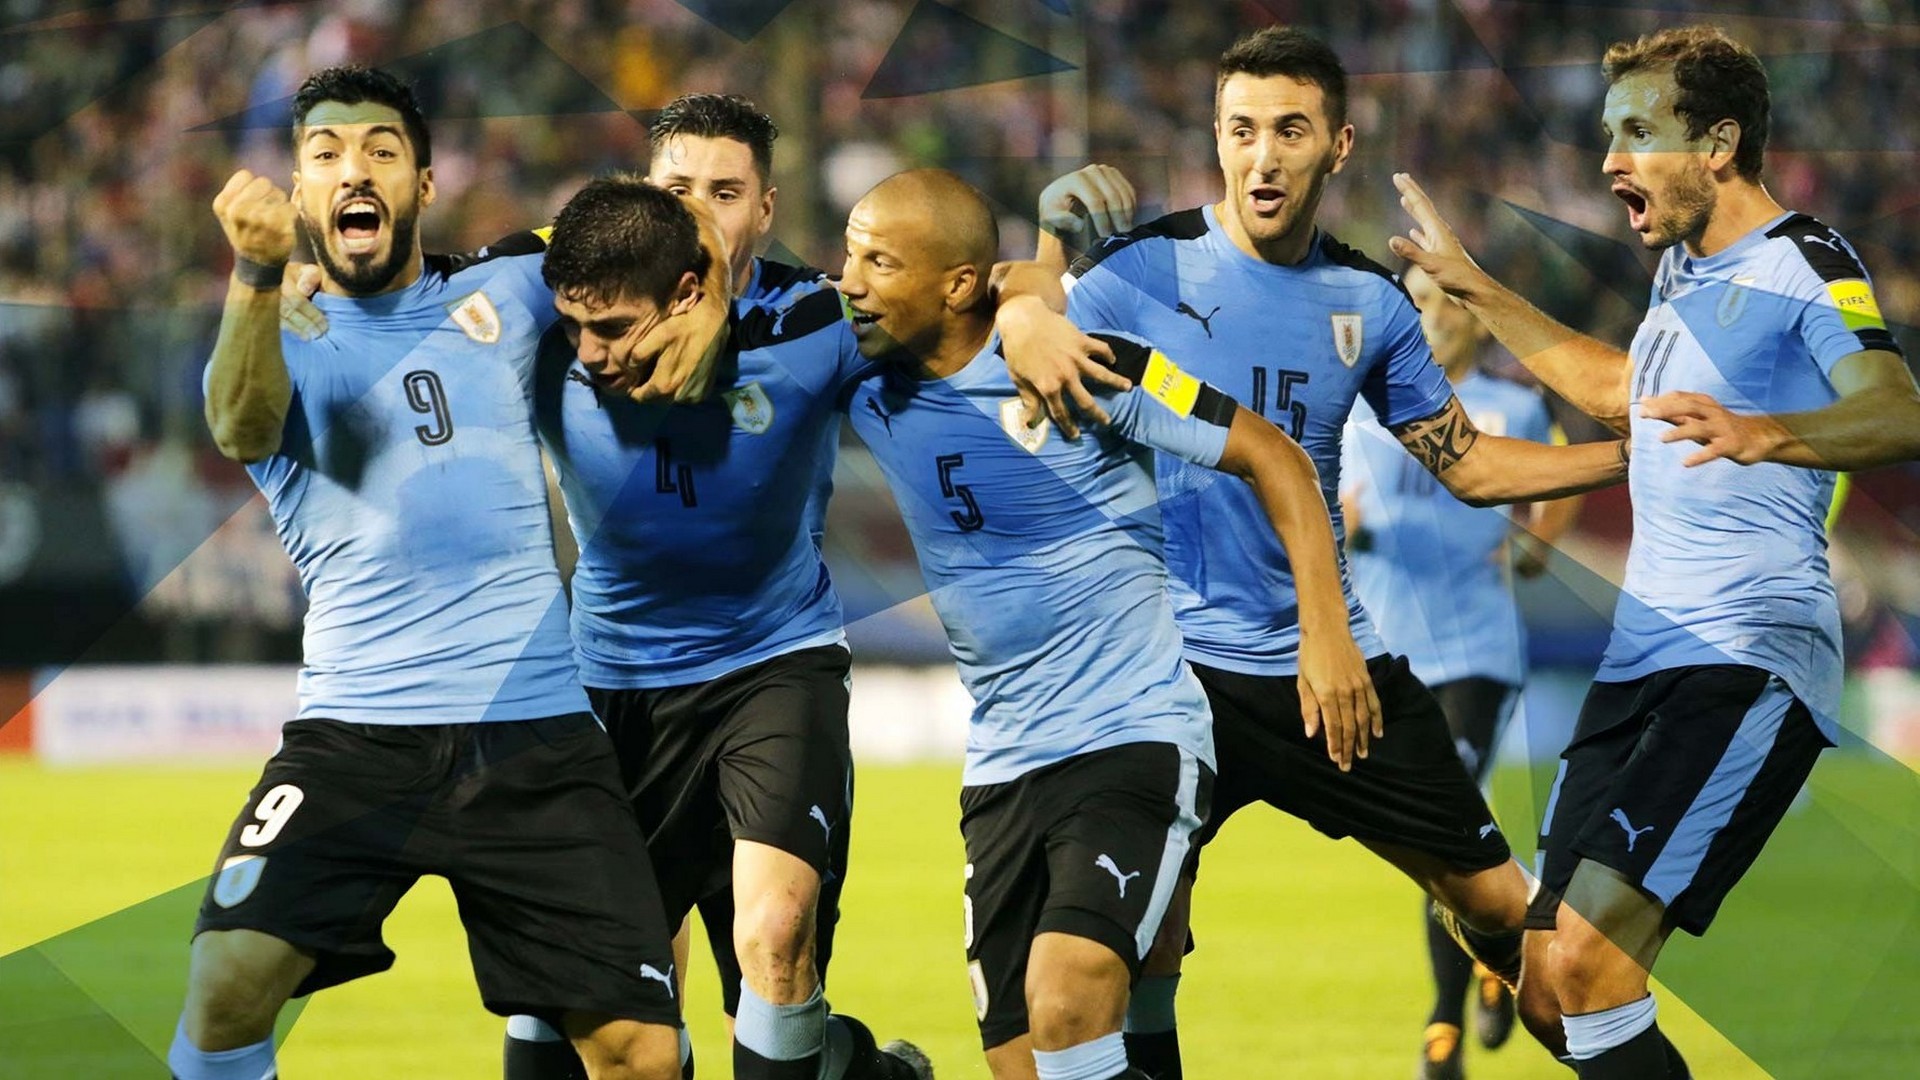 Uruguay National Team Wallpaper For Desktop with resolution 1920X1080 pixel. You can use this wallpaper as background for your desktop Computer Screensavers, Android or iPhone smartphones